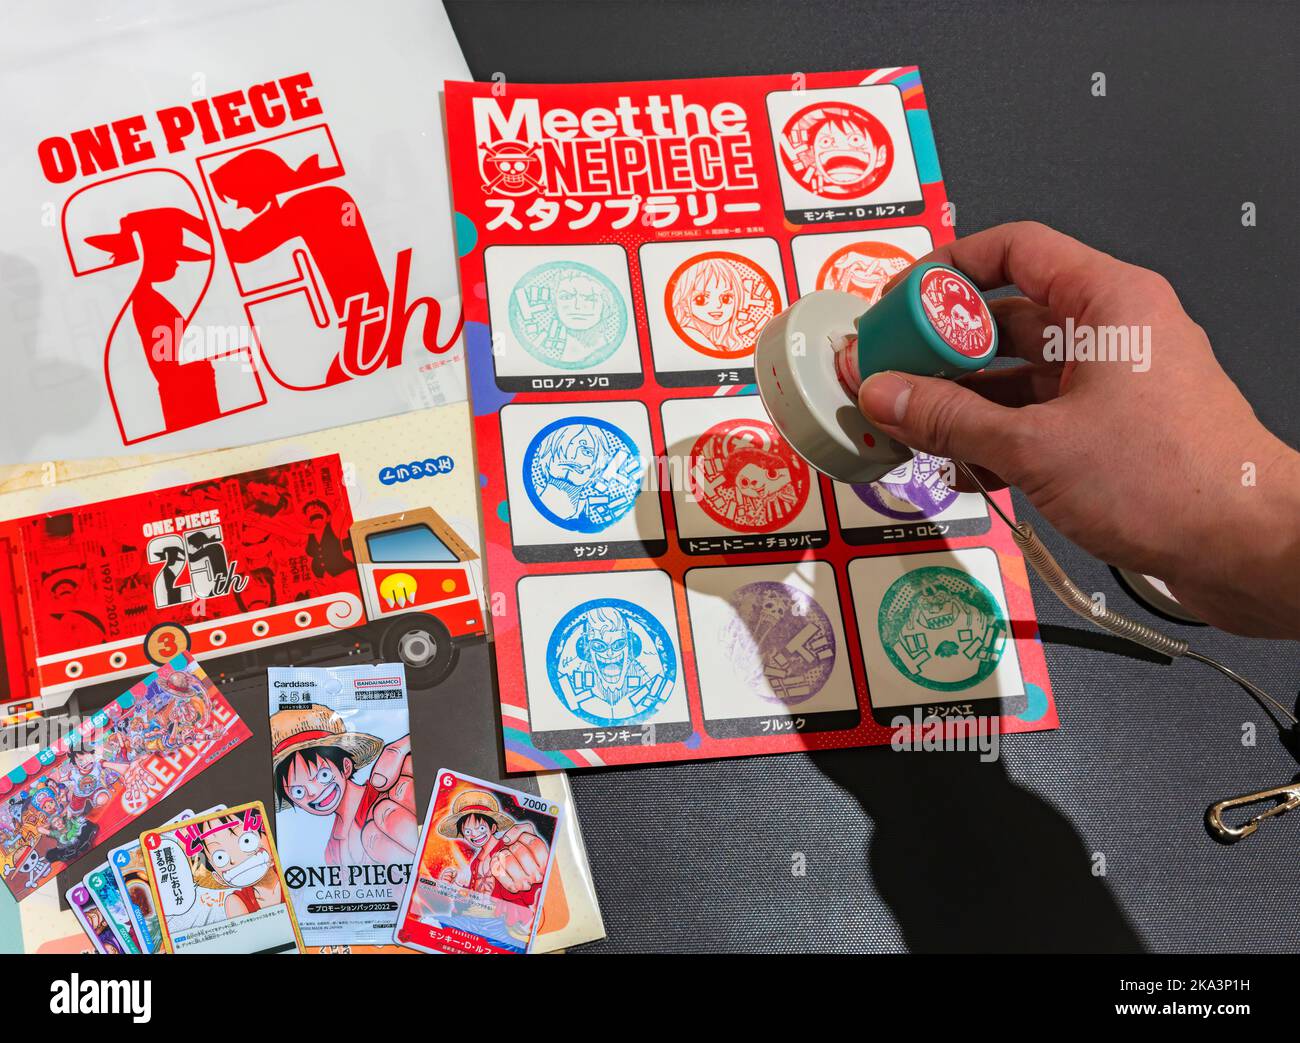 saitama, kawaguchi - sep 29 2022: Hand holding a rubber stamp depicting a character of the japanese manga and anime series One Piece to celebrate its Stock Photo